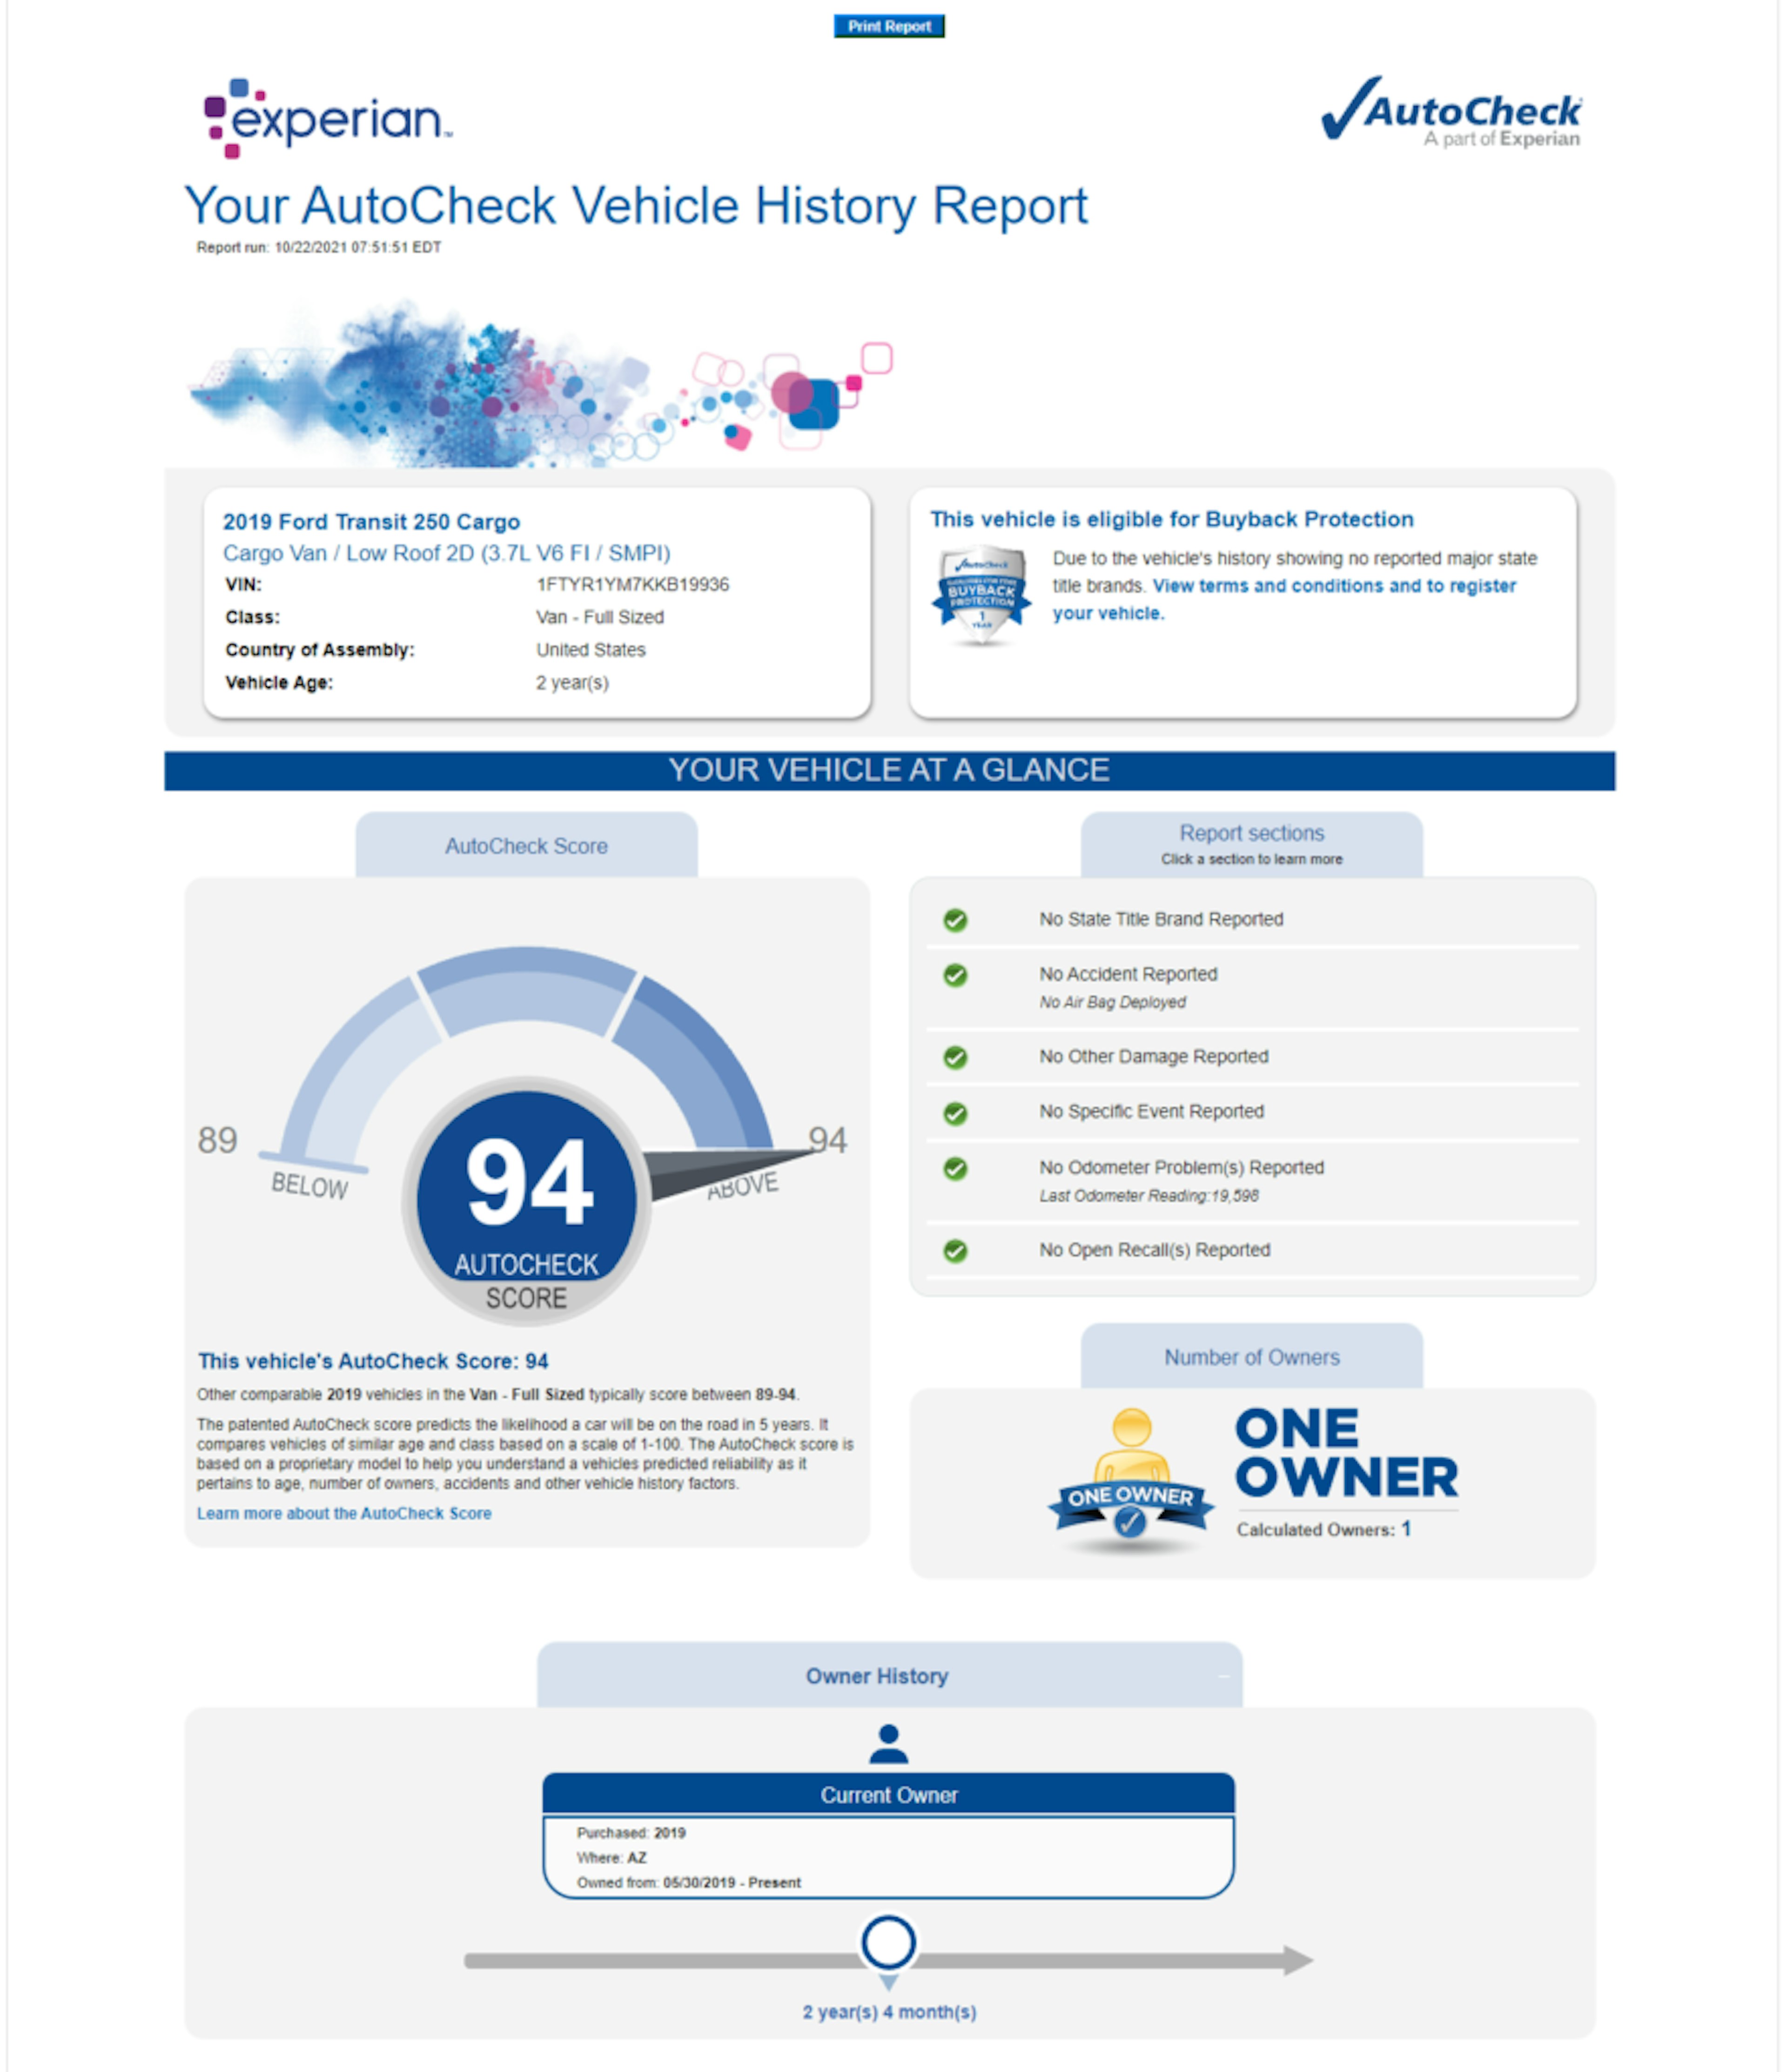 The best vehicle for courier work: eBay vehicle credit report